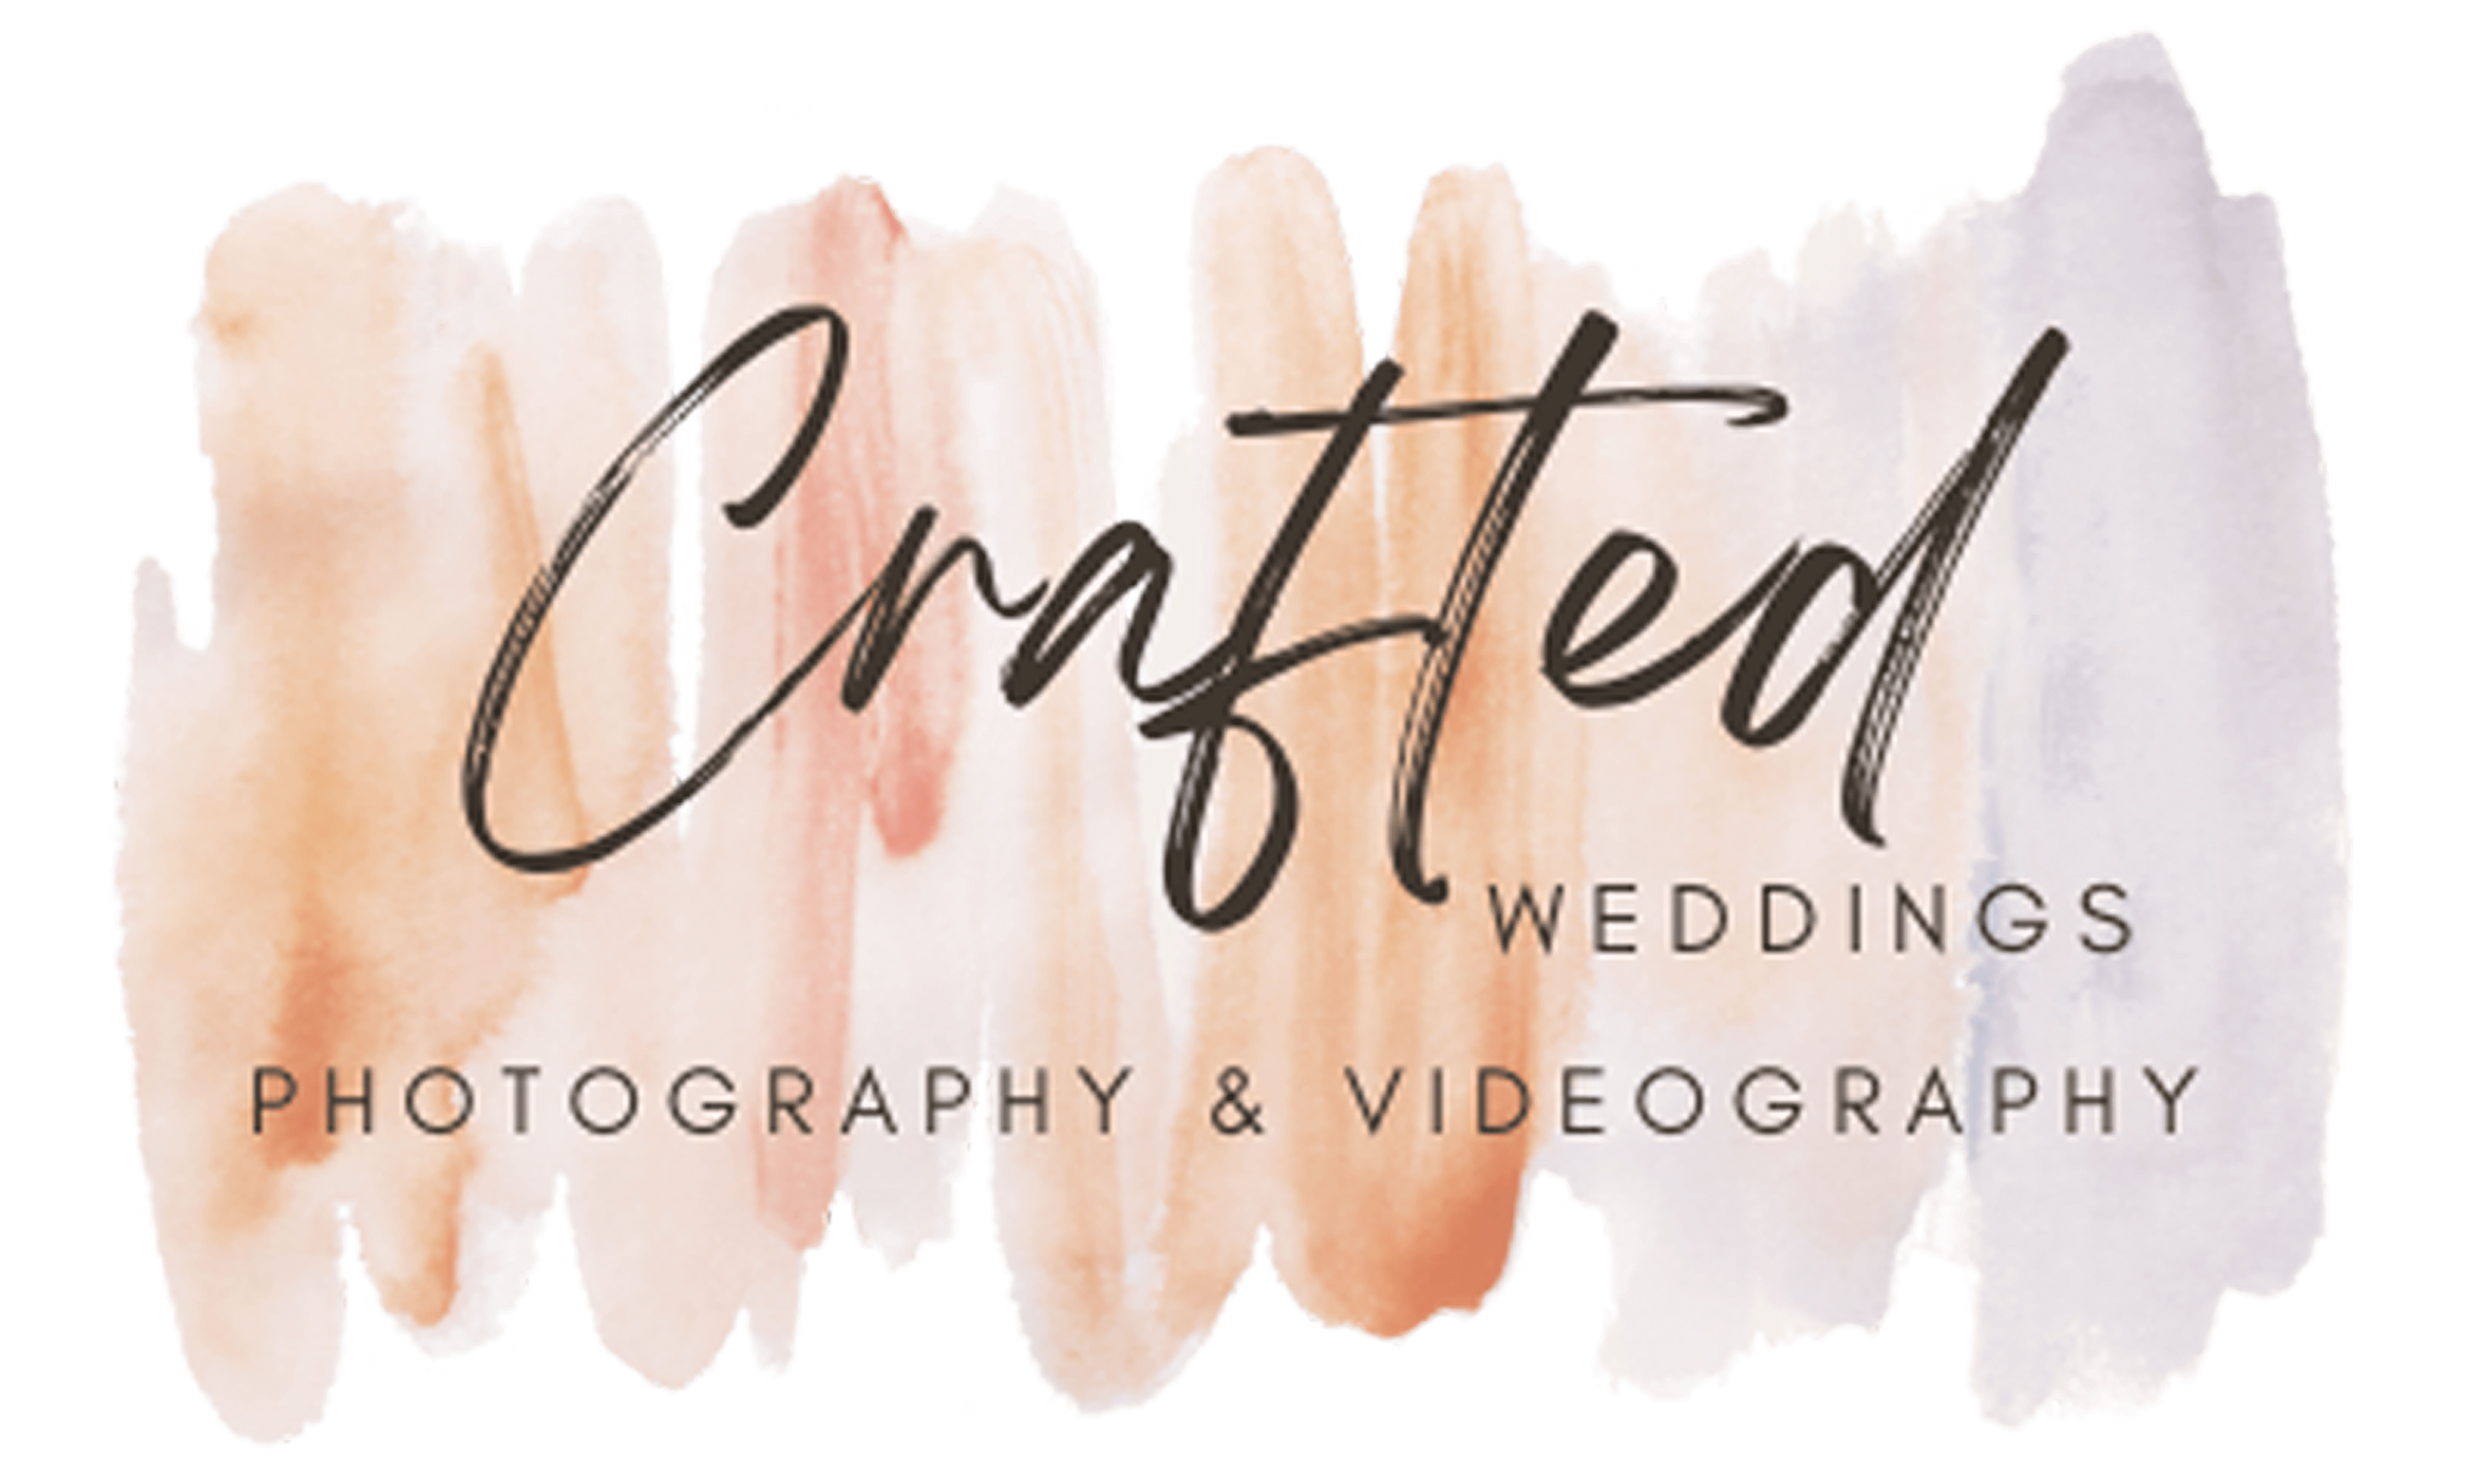 Affordable Wedding Photography & Videography by Crafted Weddings.